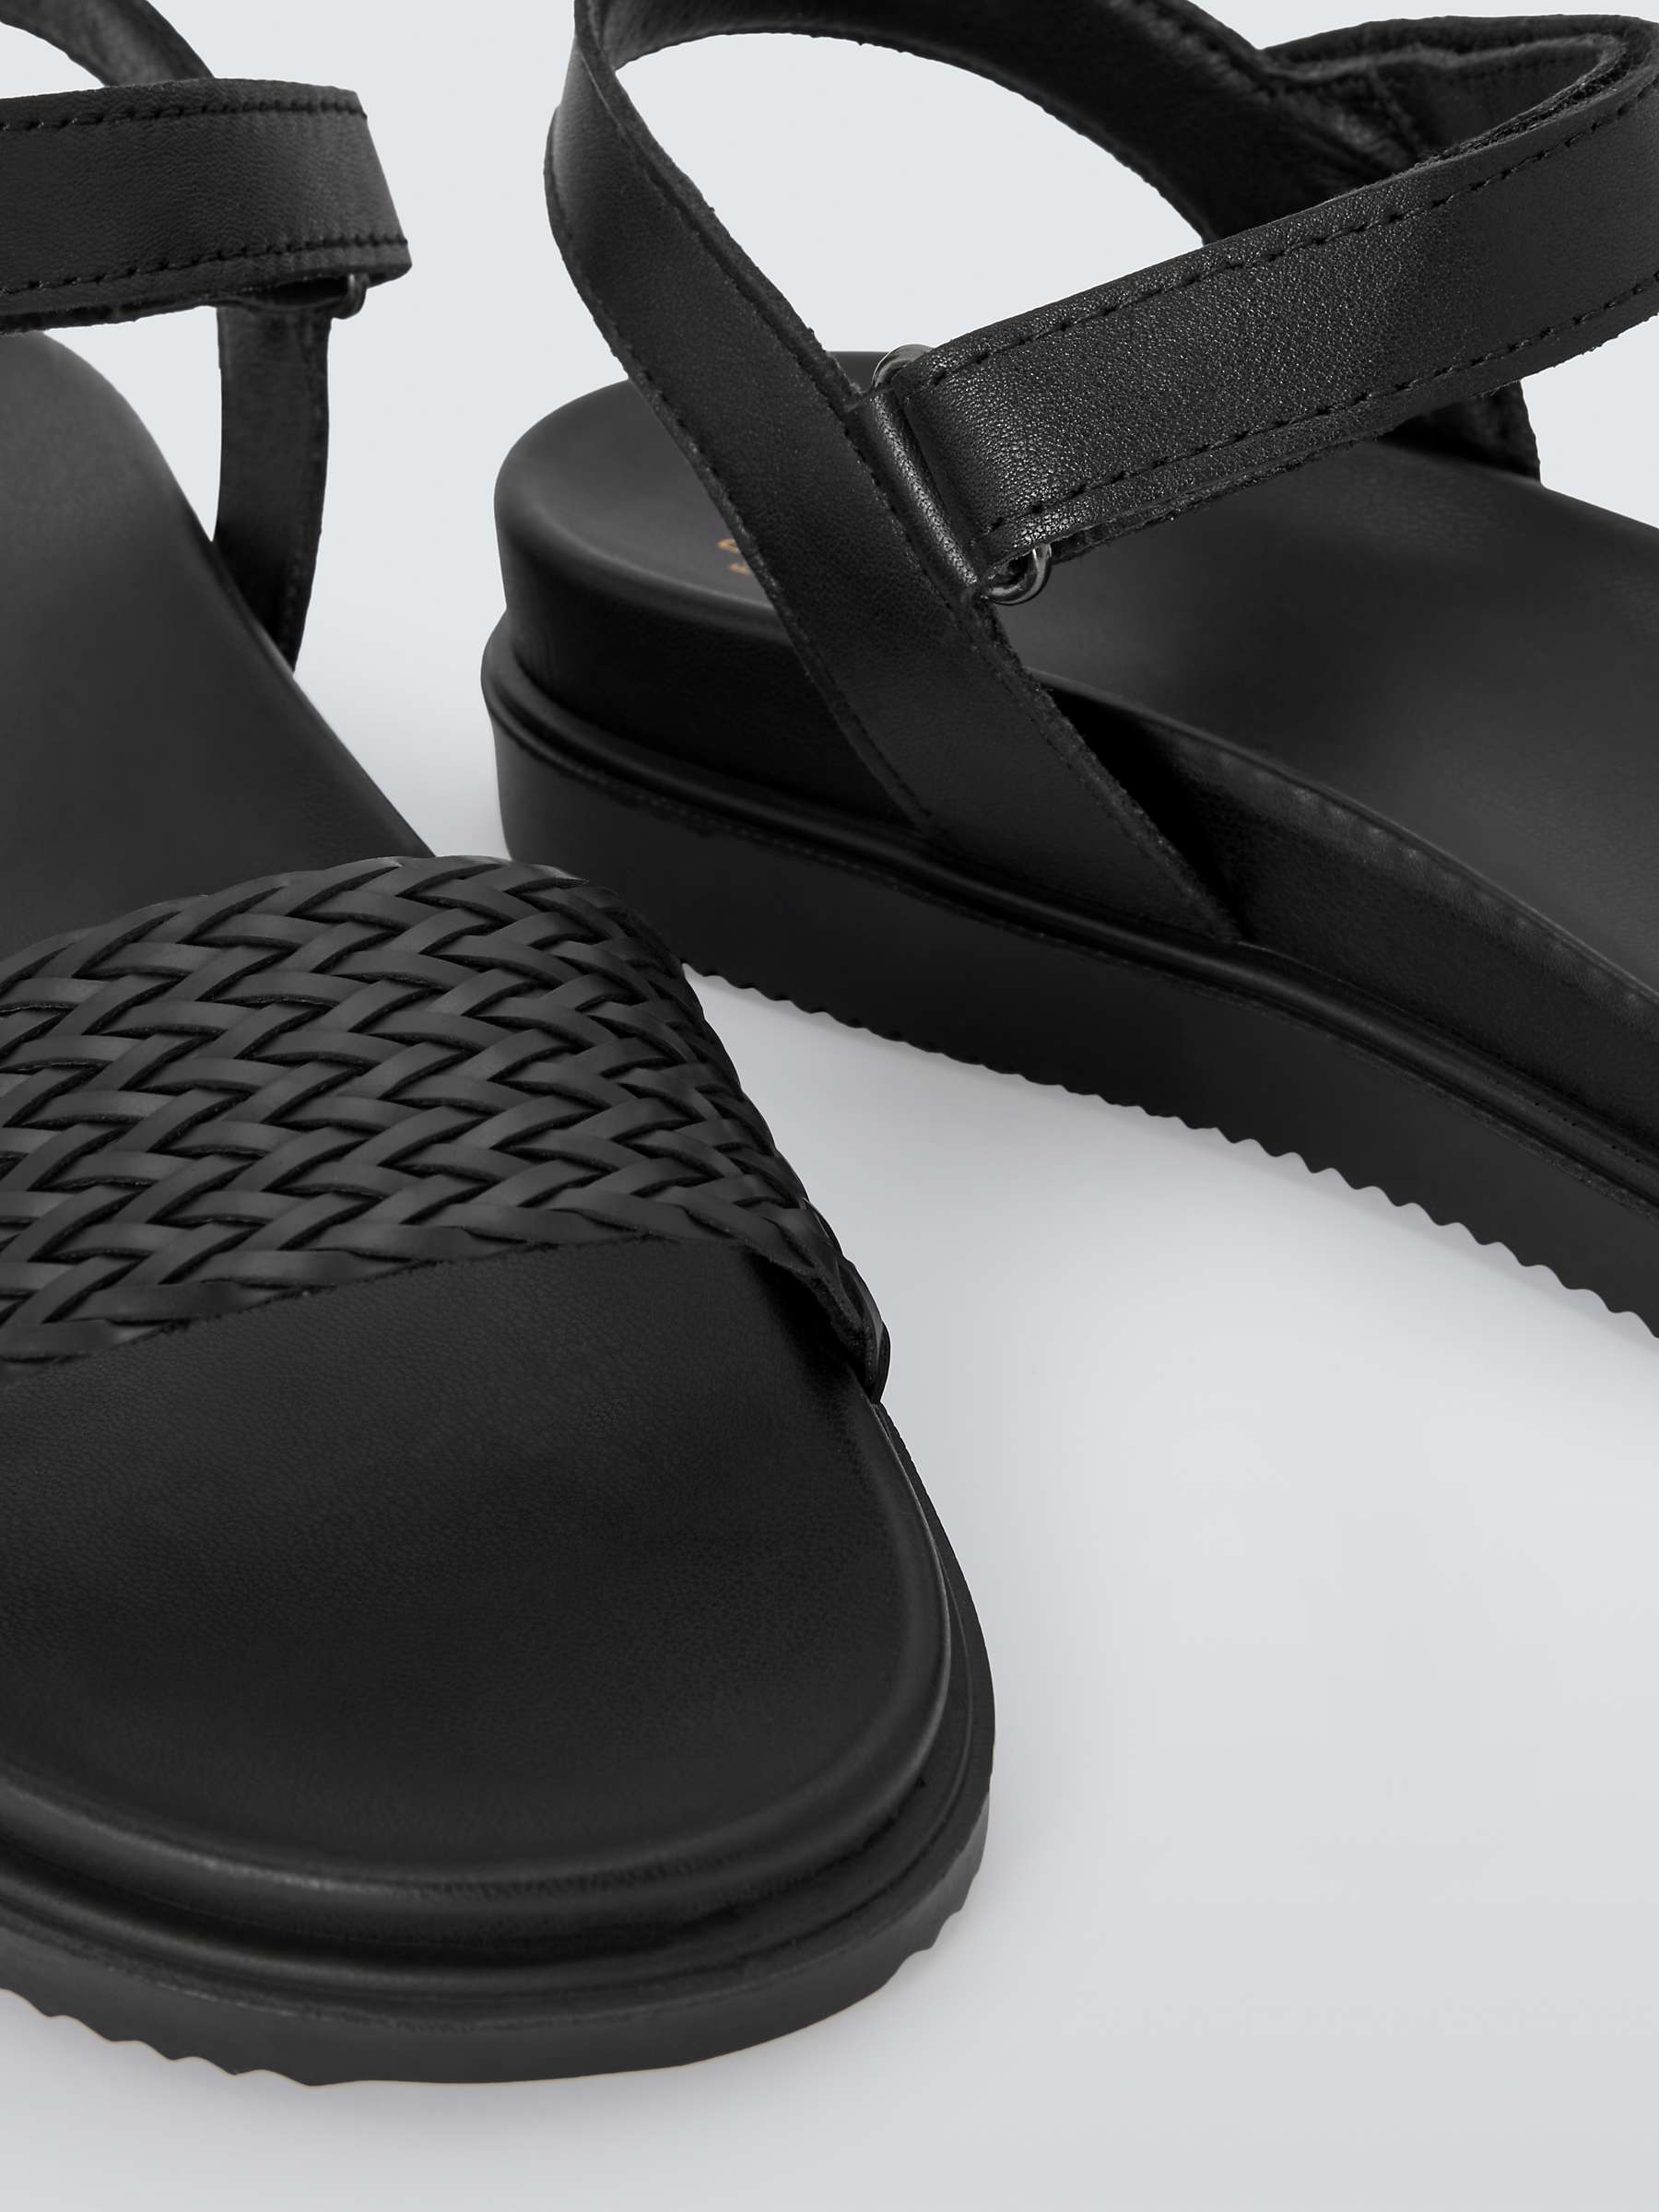 Buy John Lewis Lucie Leather Woven Strap Comfort Sandals Online at johnlewis.com